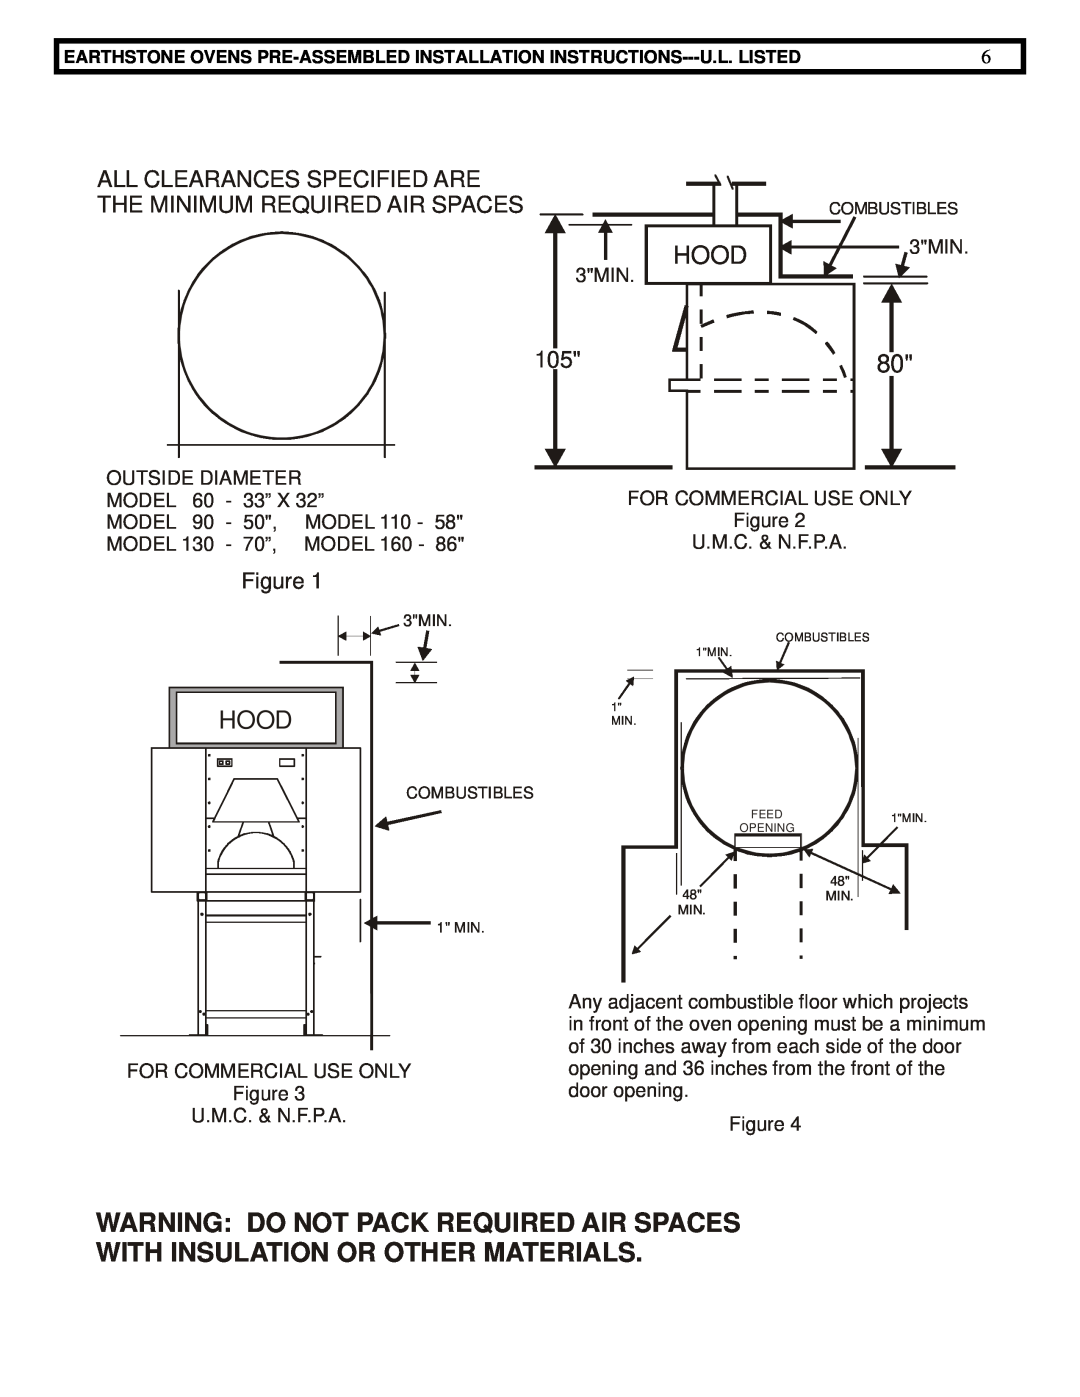 EarthStone woofire oven installation instructions Hood, All Clearances Specified Are, The Minimum Required Air Spaces 